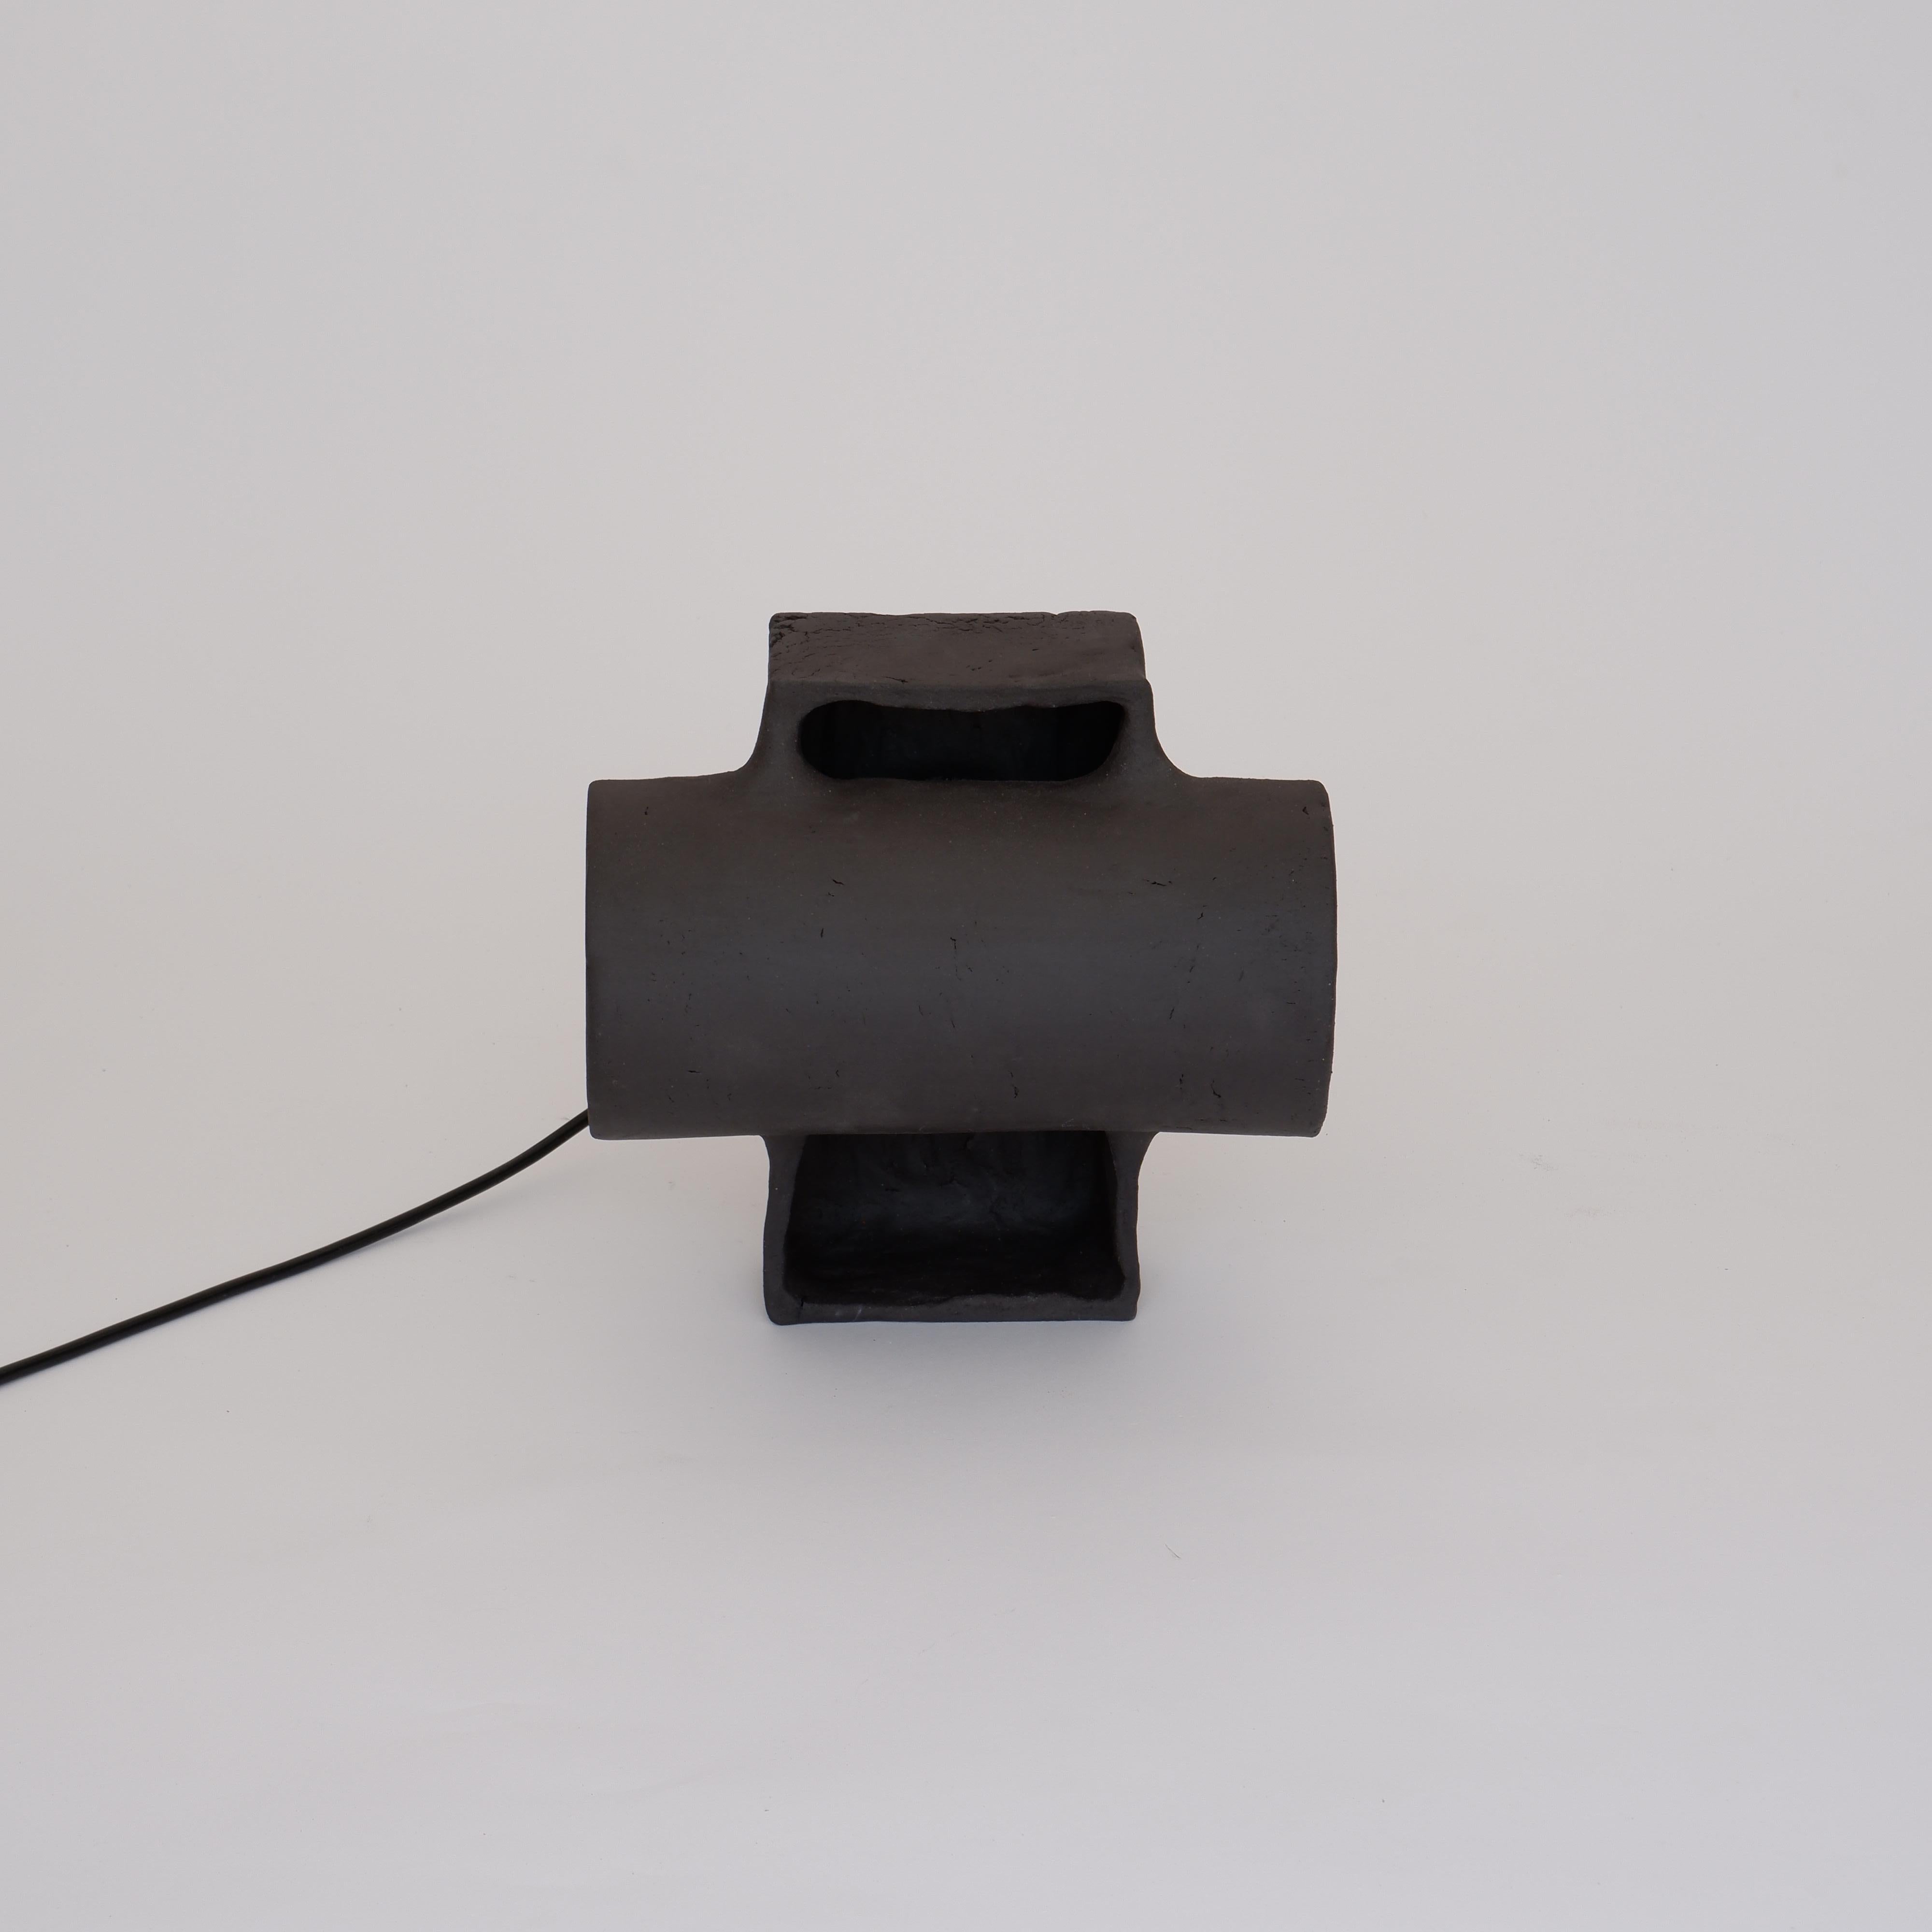 Accre Small Black Lamp by Ia Kutateladze
One Of A Kind.
Dimensions: D 20 x W 23 x H 22 cm.
Materials: Clay.

Each piece is one of a kind, due to its free hand-building process. Different color variations available: raw black clay, raw white clay,